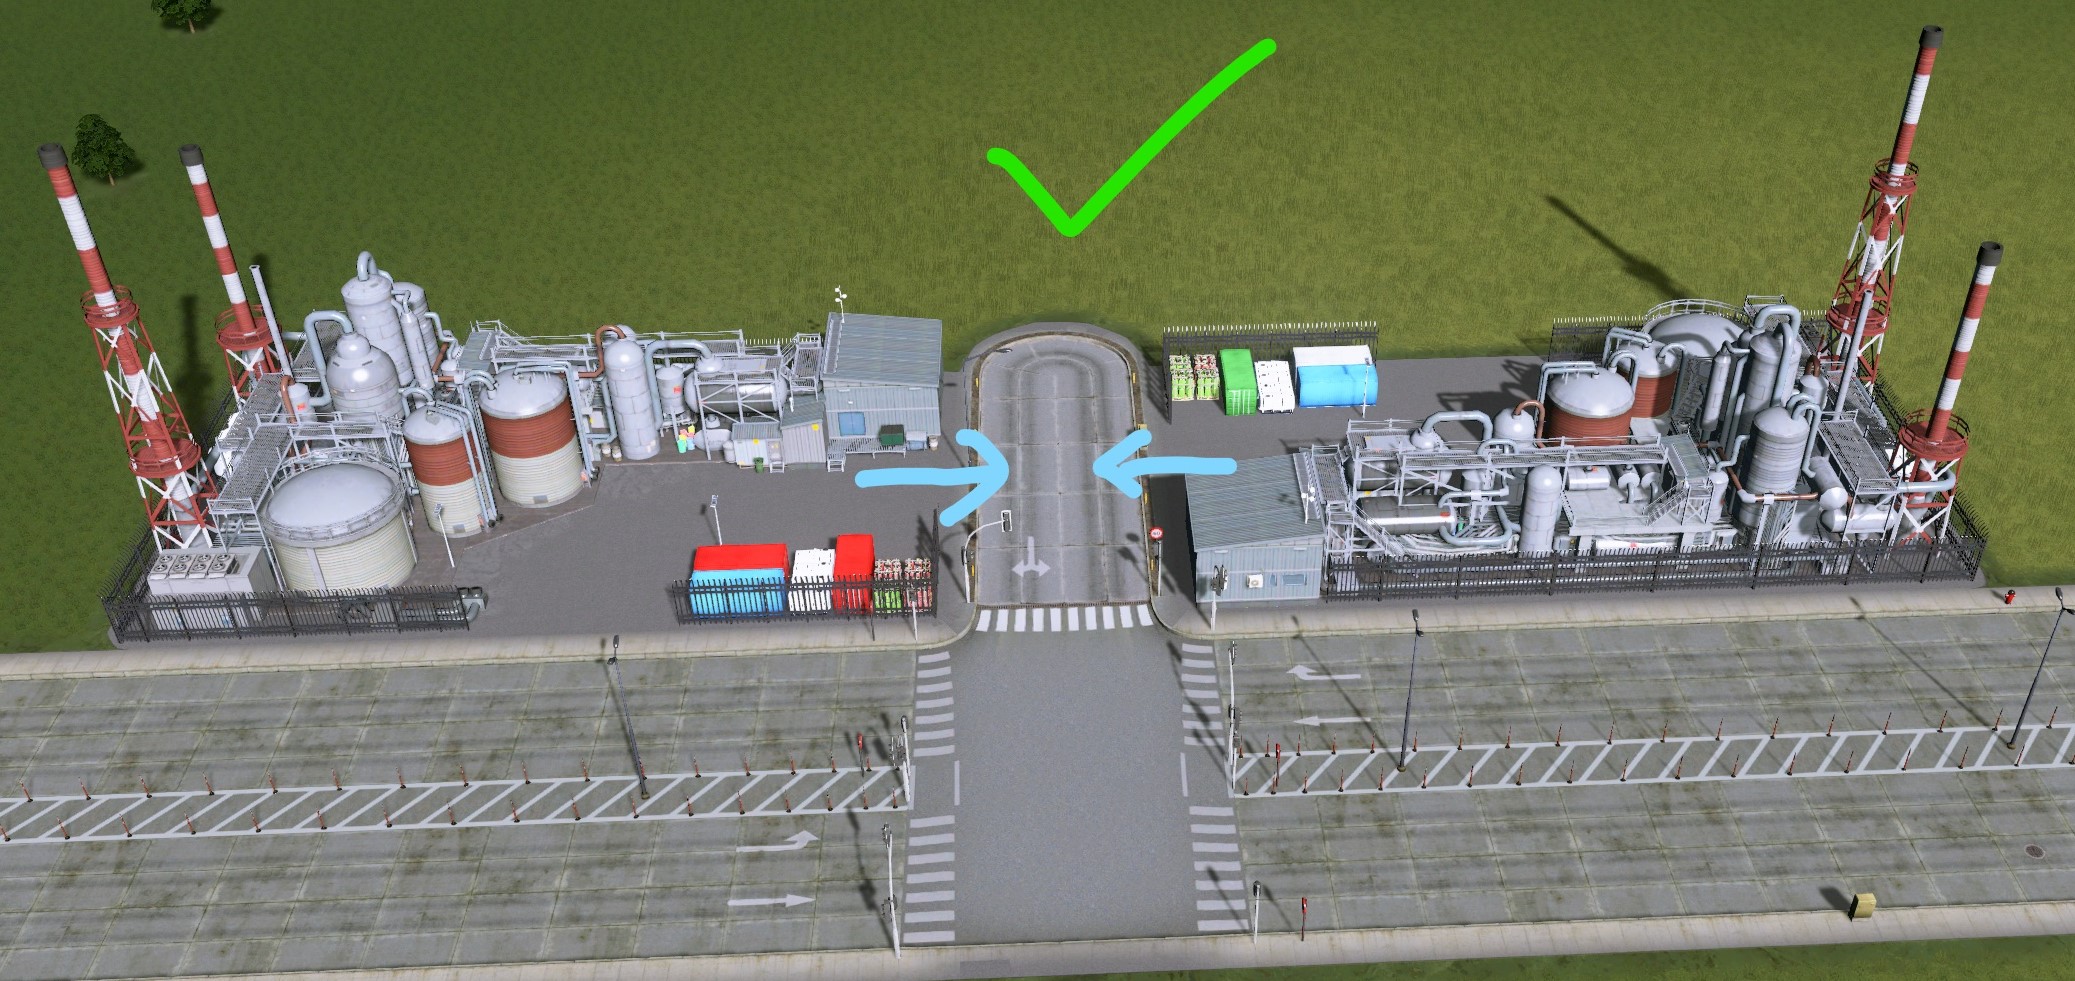 Cities: Skylines Useful Techniques for Industries and Supply Chain  - Cargo Transportation Options and Traffic Tips - E8B388C